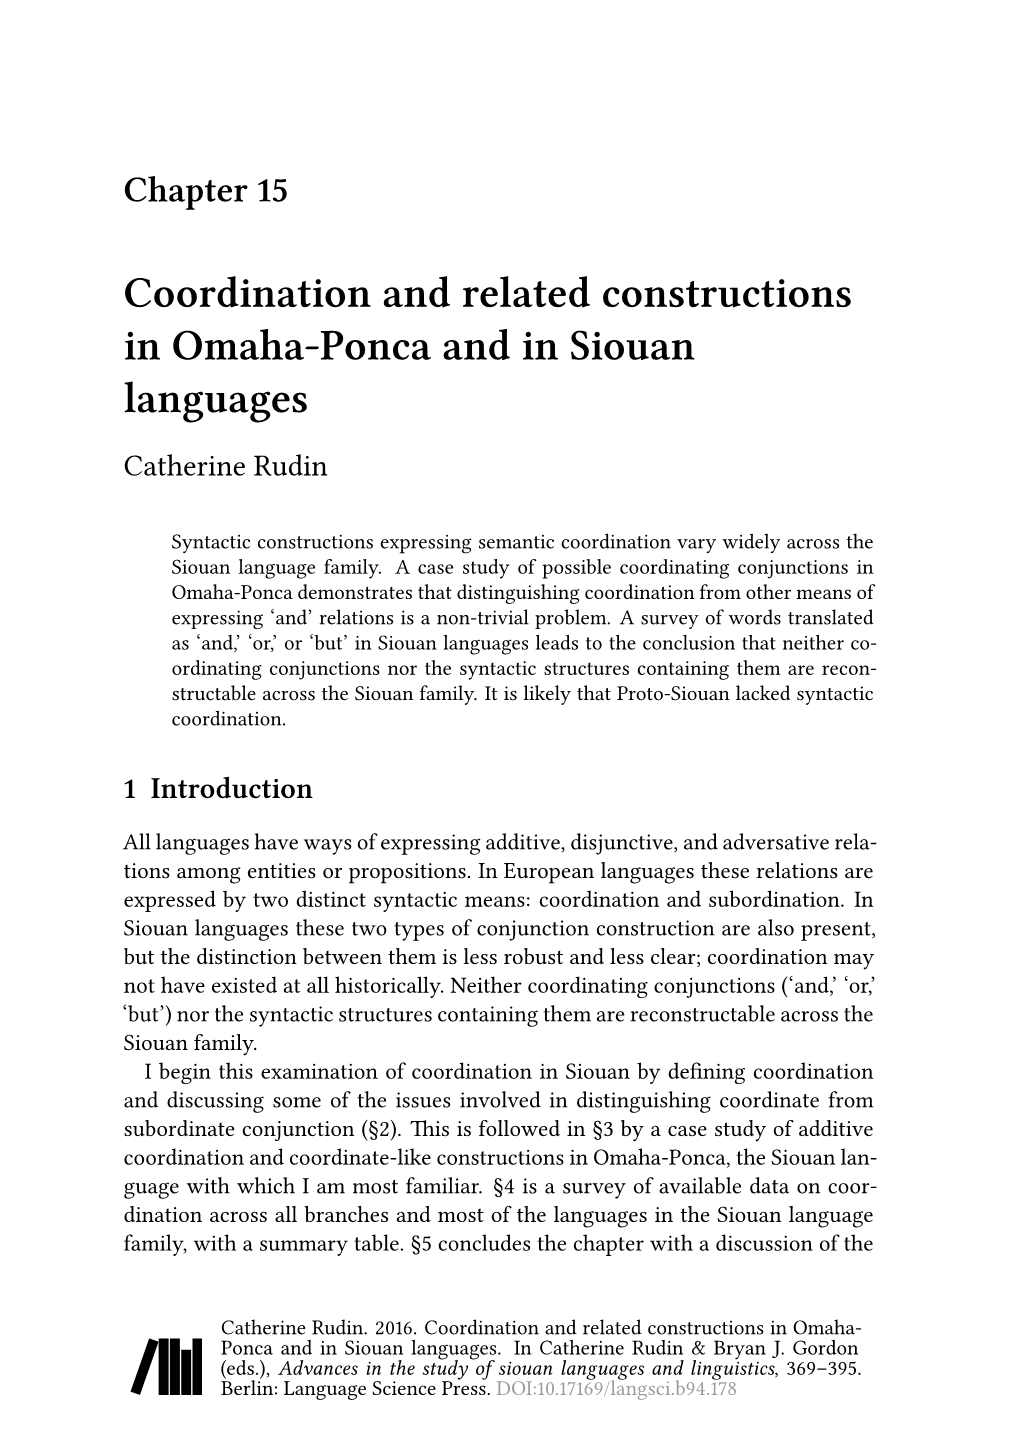 Coordination and Related Constructions in Omaha-Ponca and in Siouan Languages Catherine Rudin